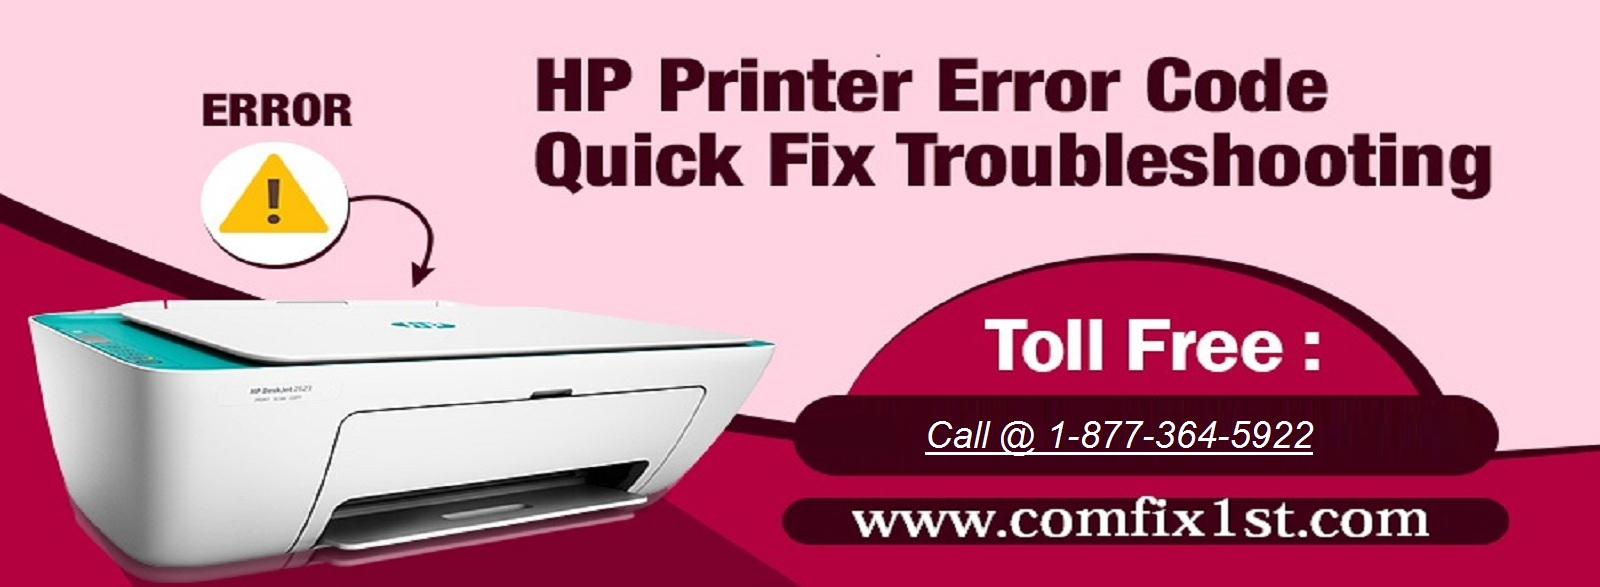 What is the complete process for connecting an HP printer with a WPS pin?